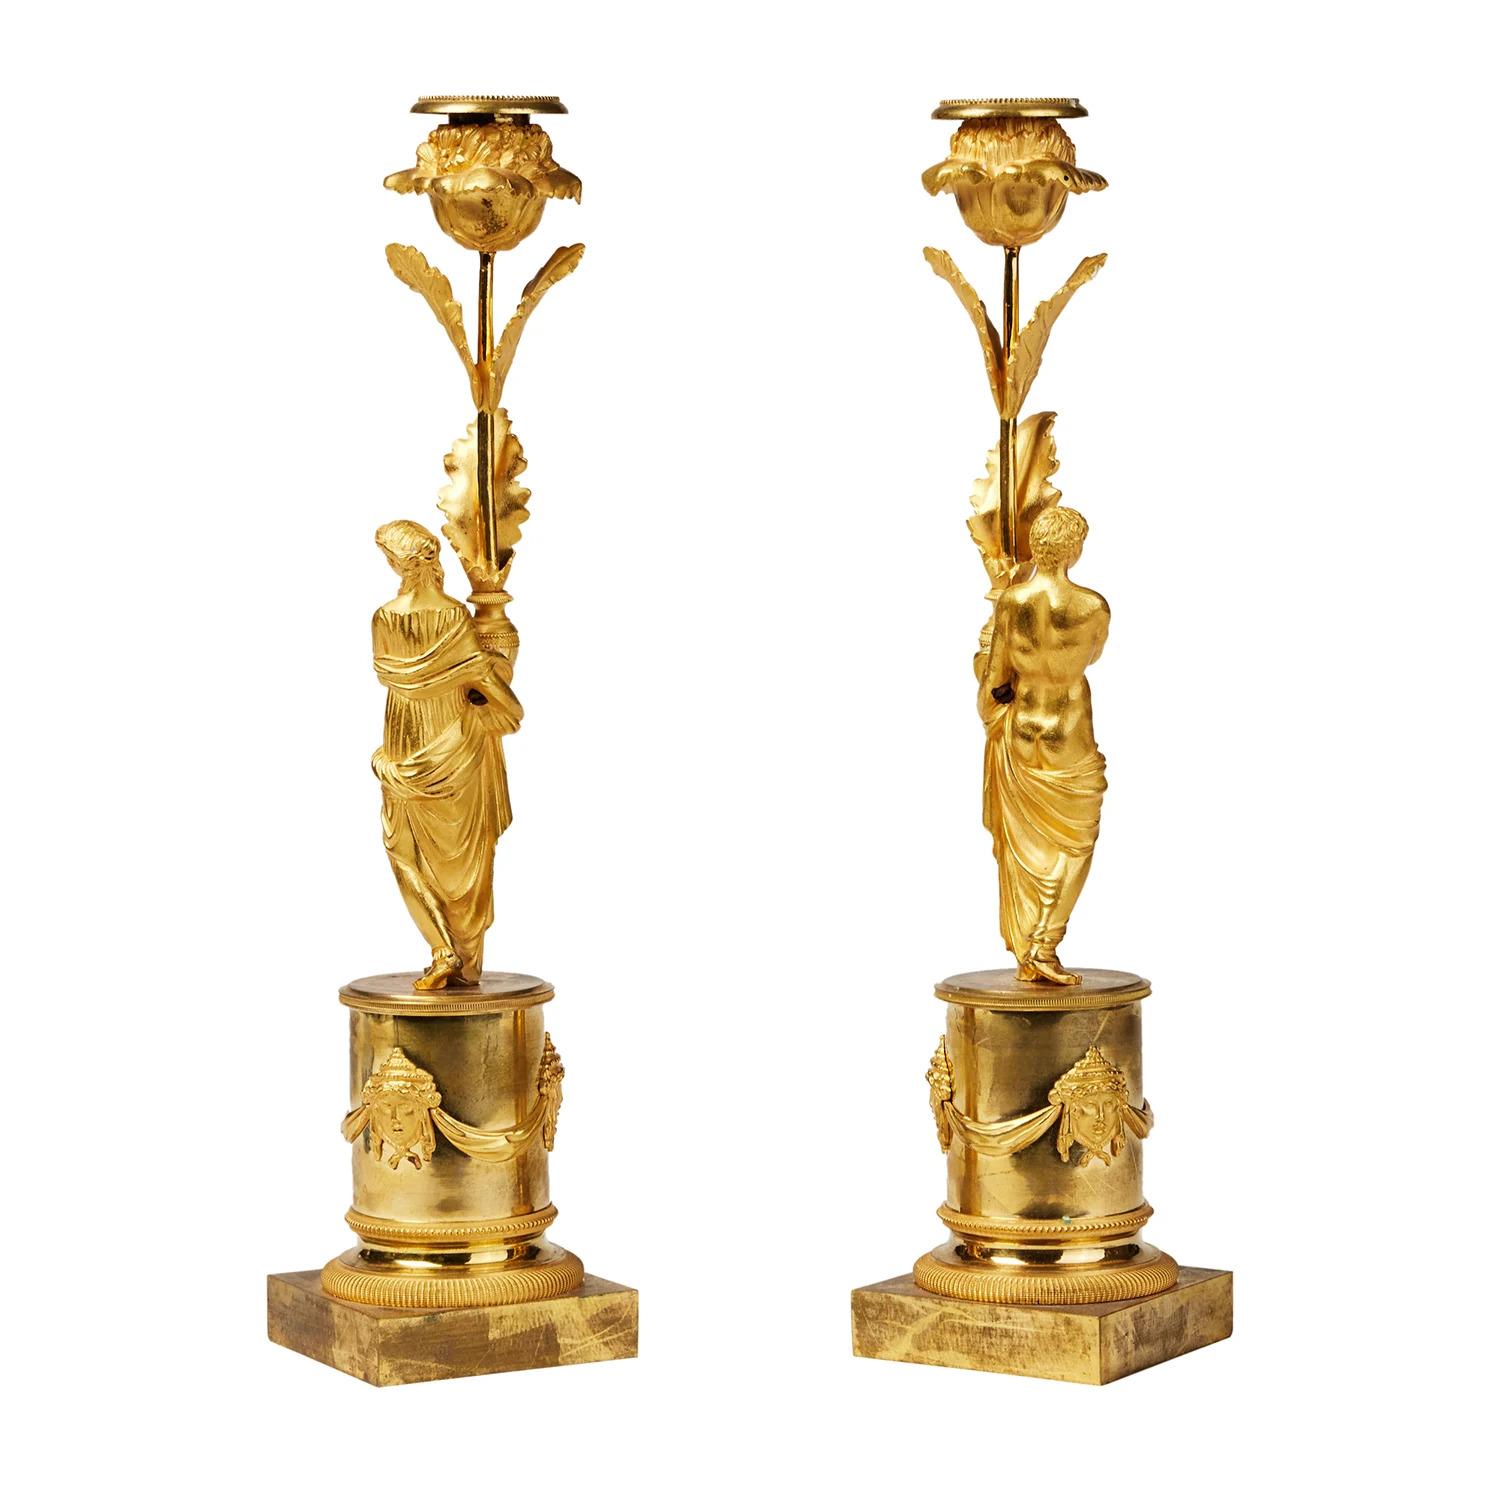 Gilt 18th-19th Century French Empire Pair of Antique Gilded Bronze Candle Holders For Sale